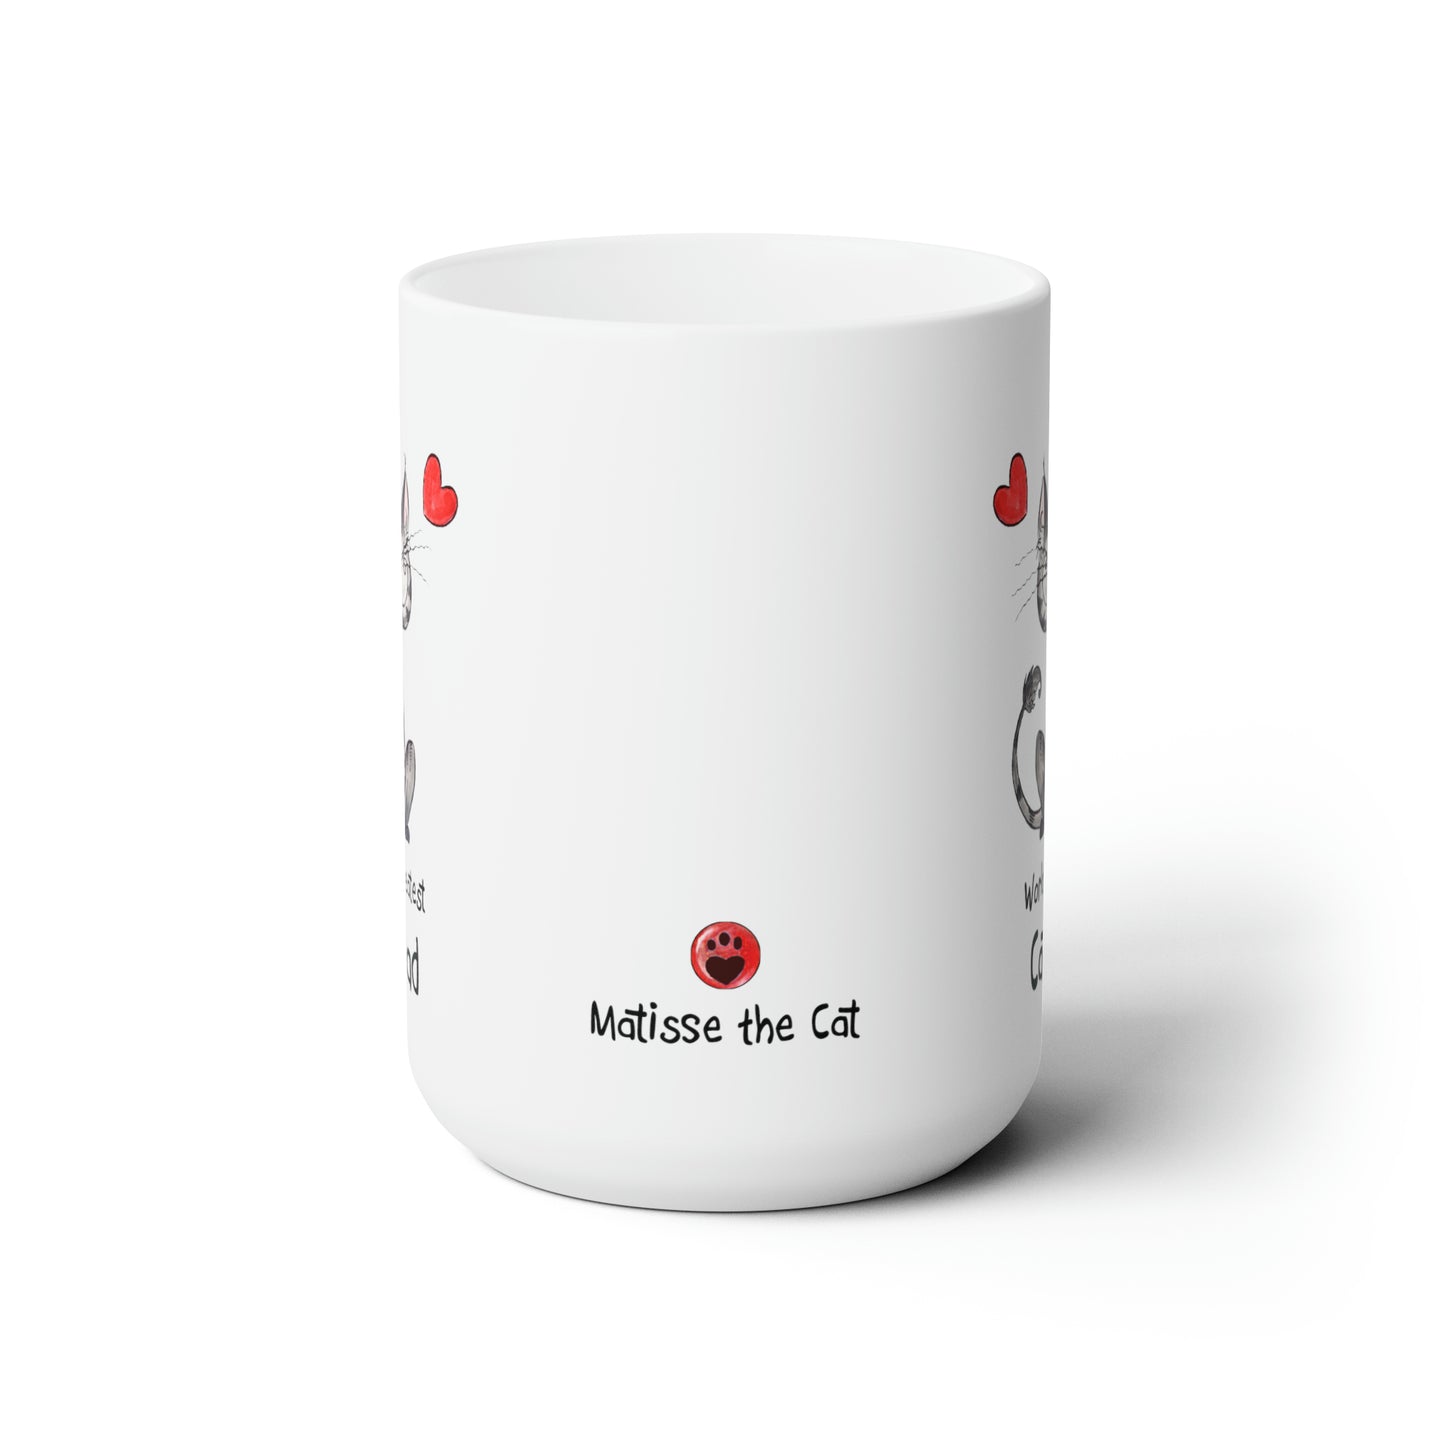 USA Matisse the cat world’s greatest cat dad 15oz jumbo. Displaying the Matisse paw button in the centre of the mug.